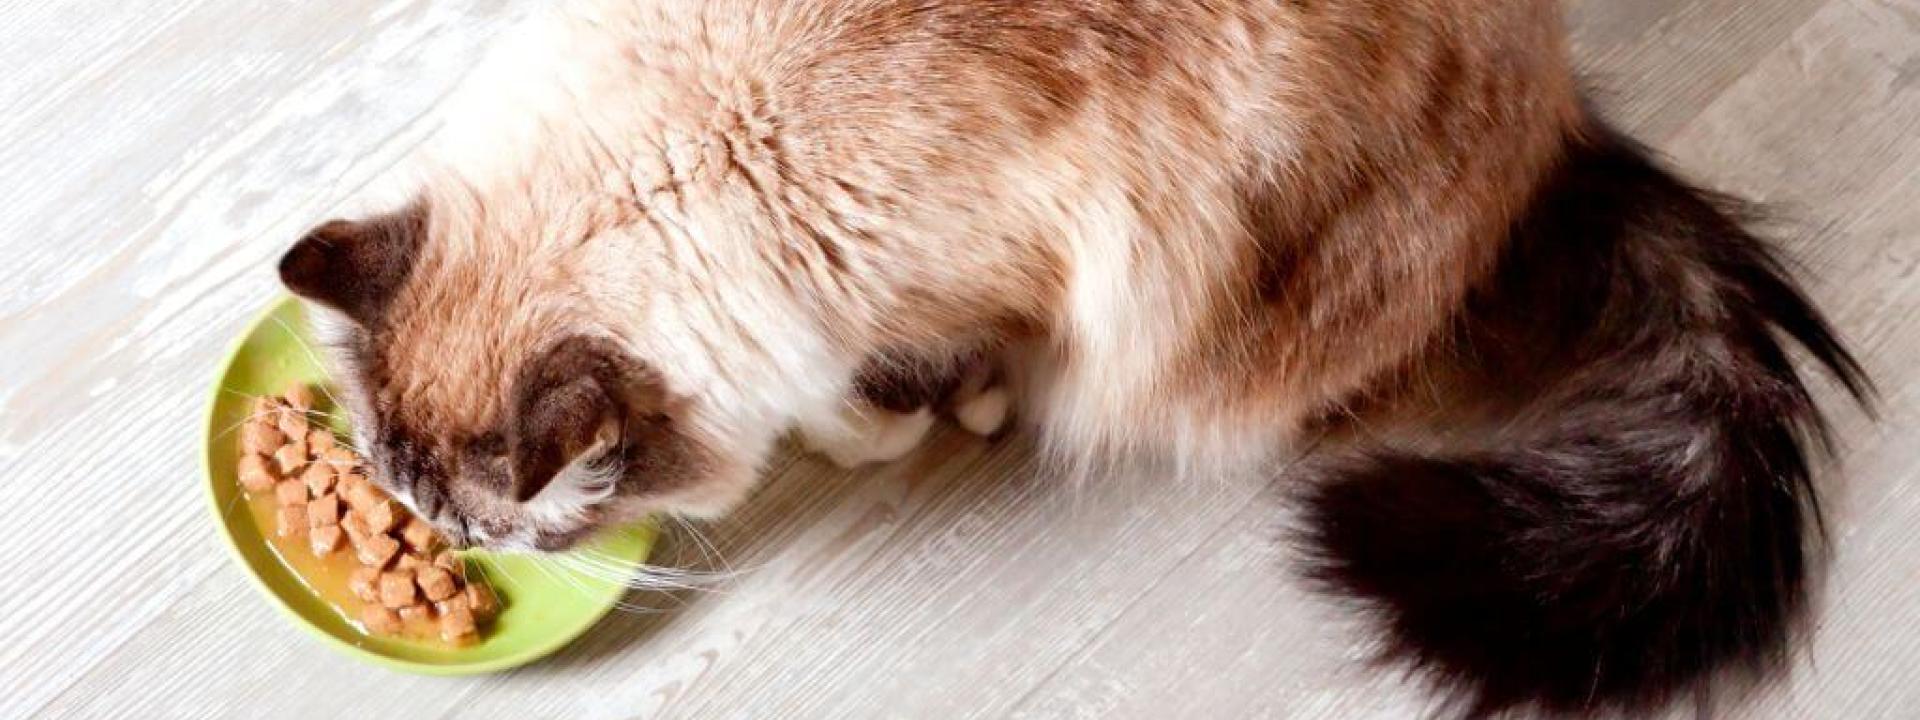 Cat eating food out of a bowl